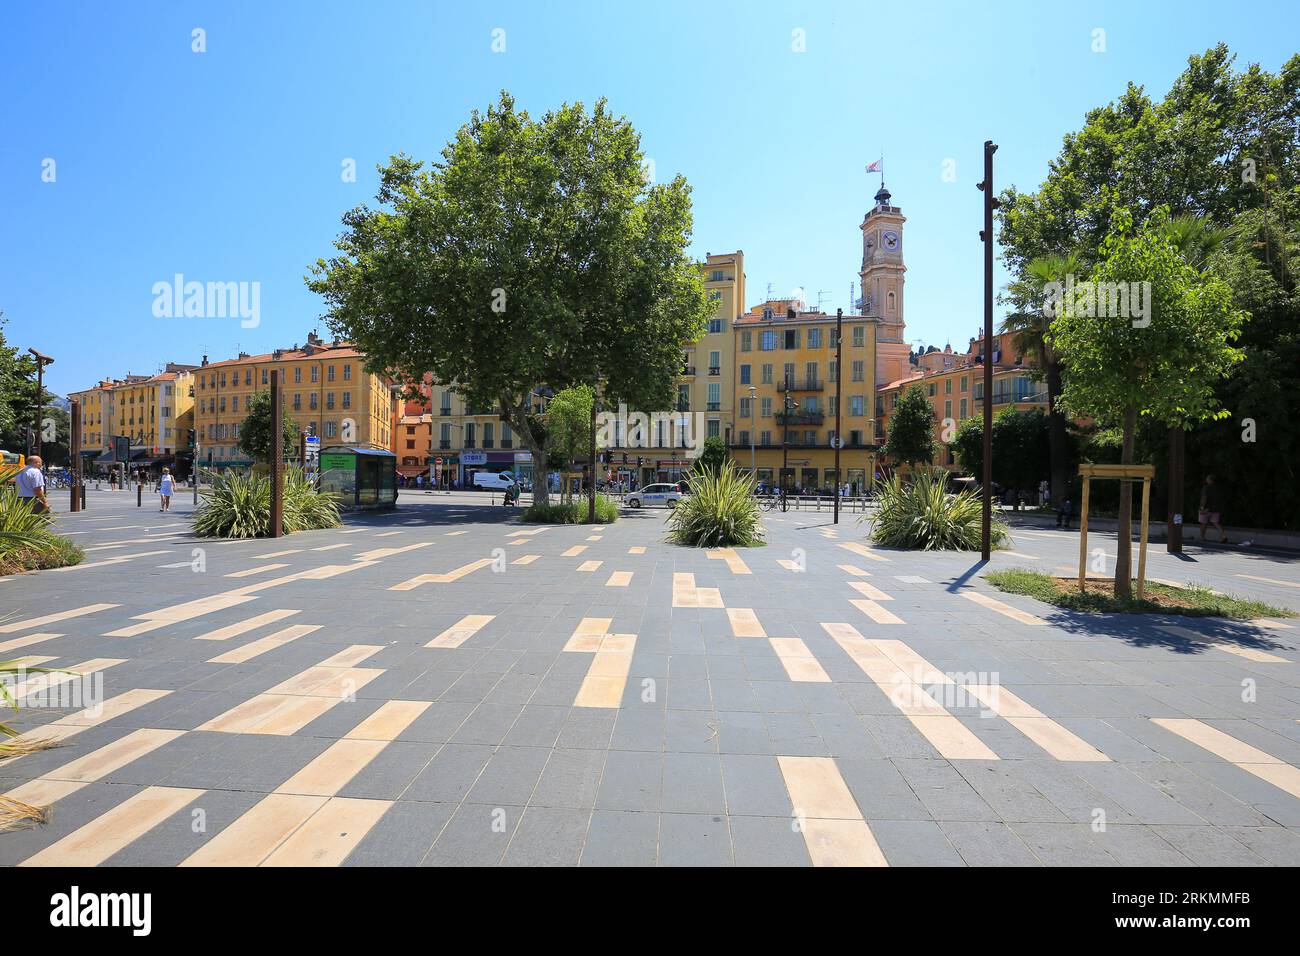 Square in the center in Nice city, France Stock Photo